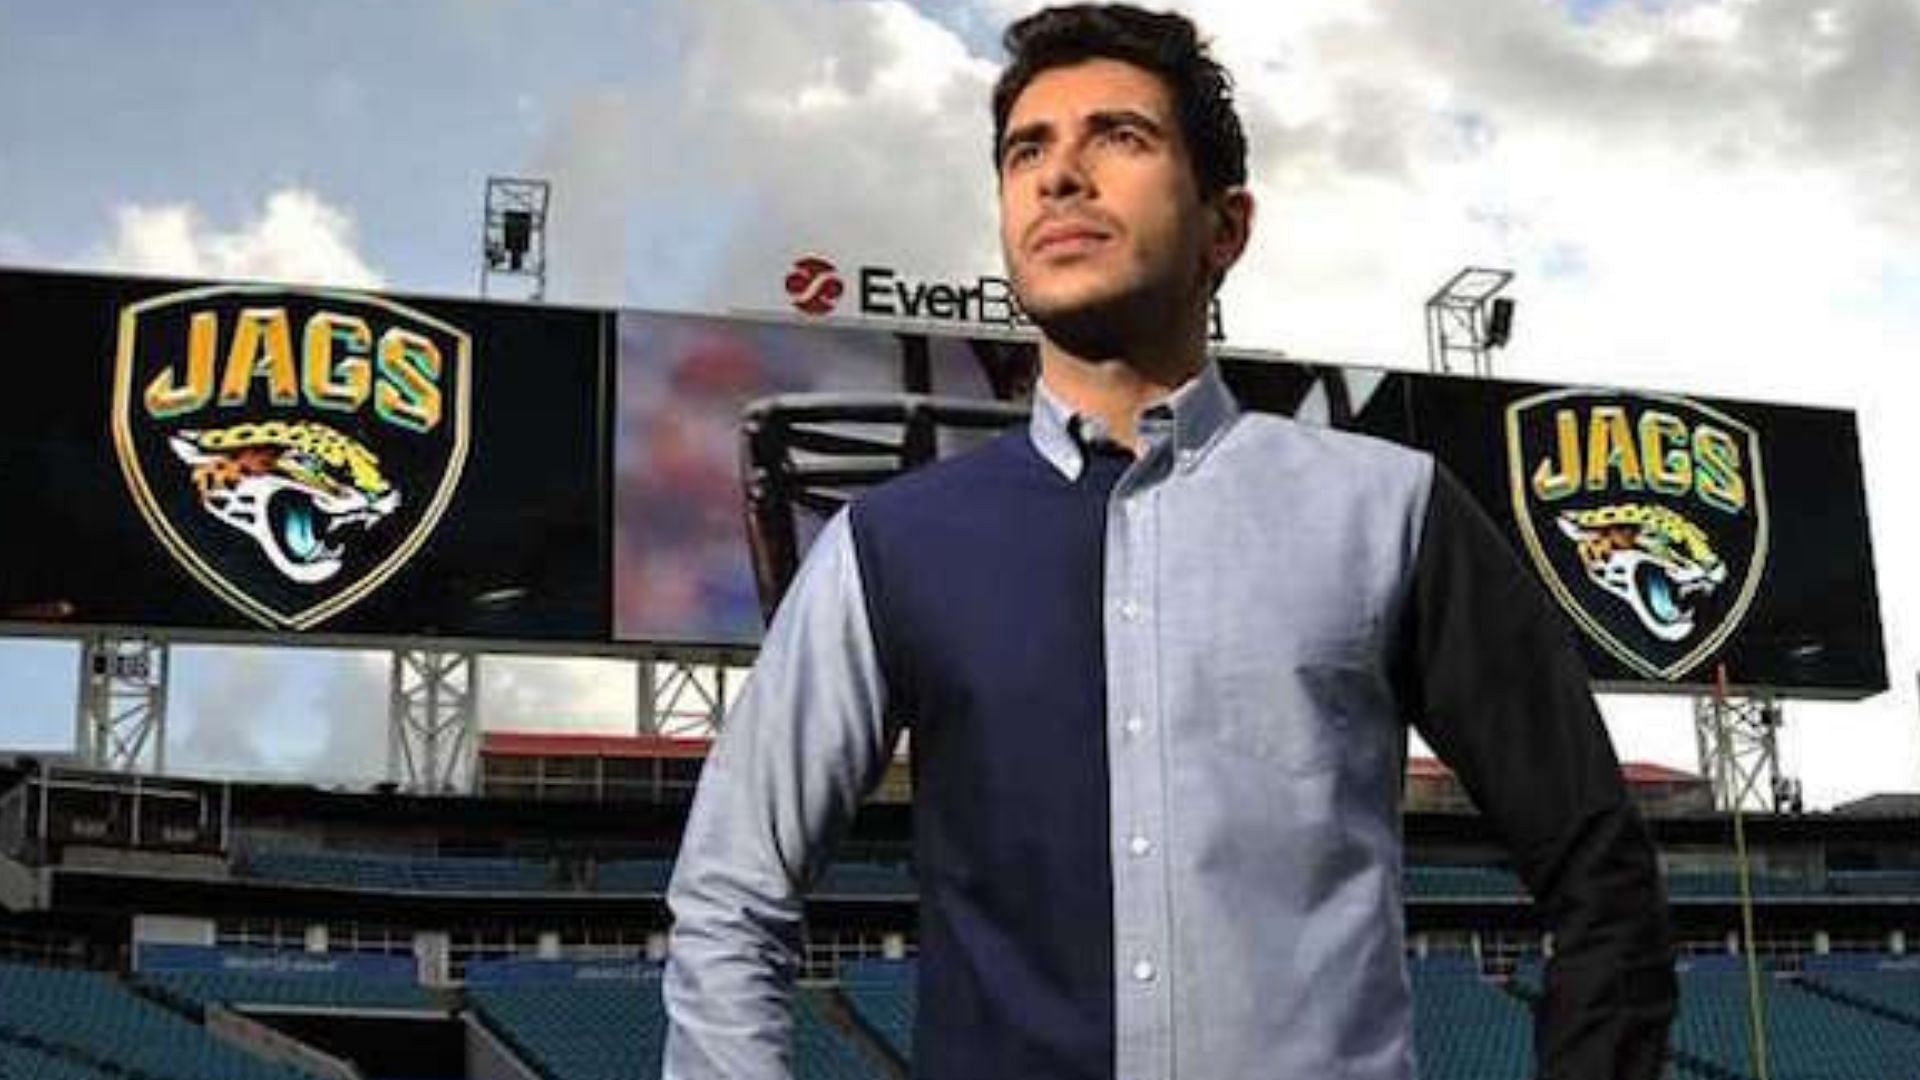 Tony Khan is also the co-owner of the Jacksonville Jaguars